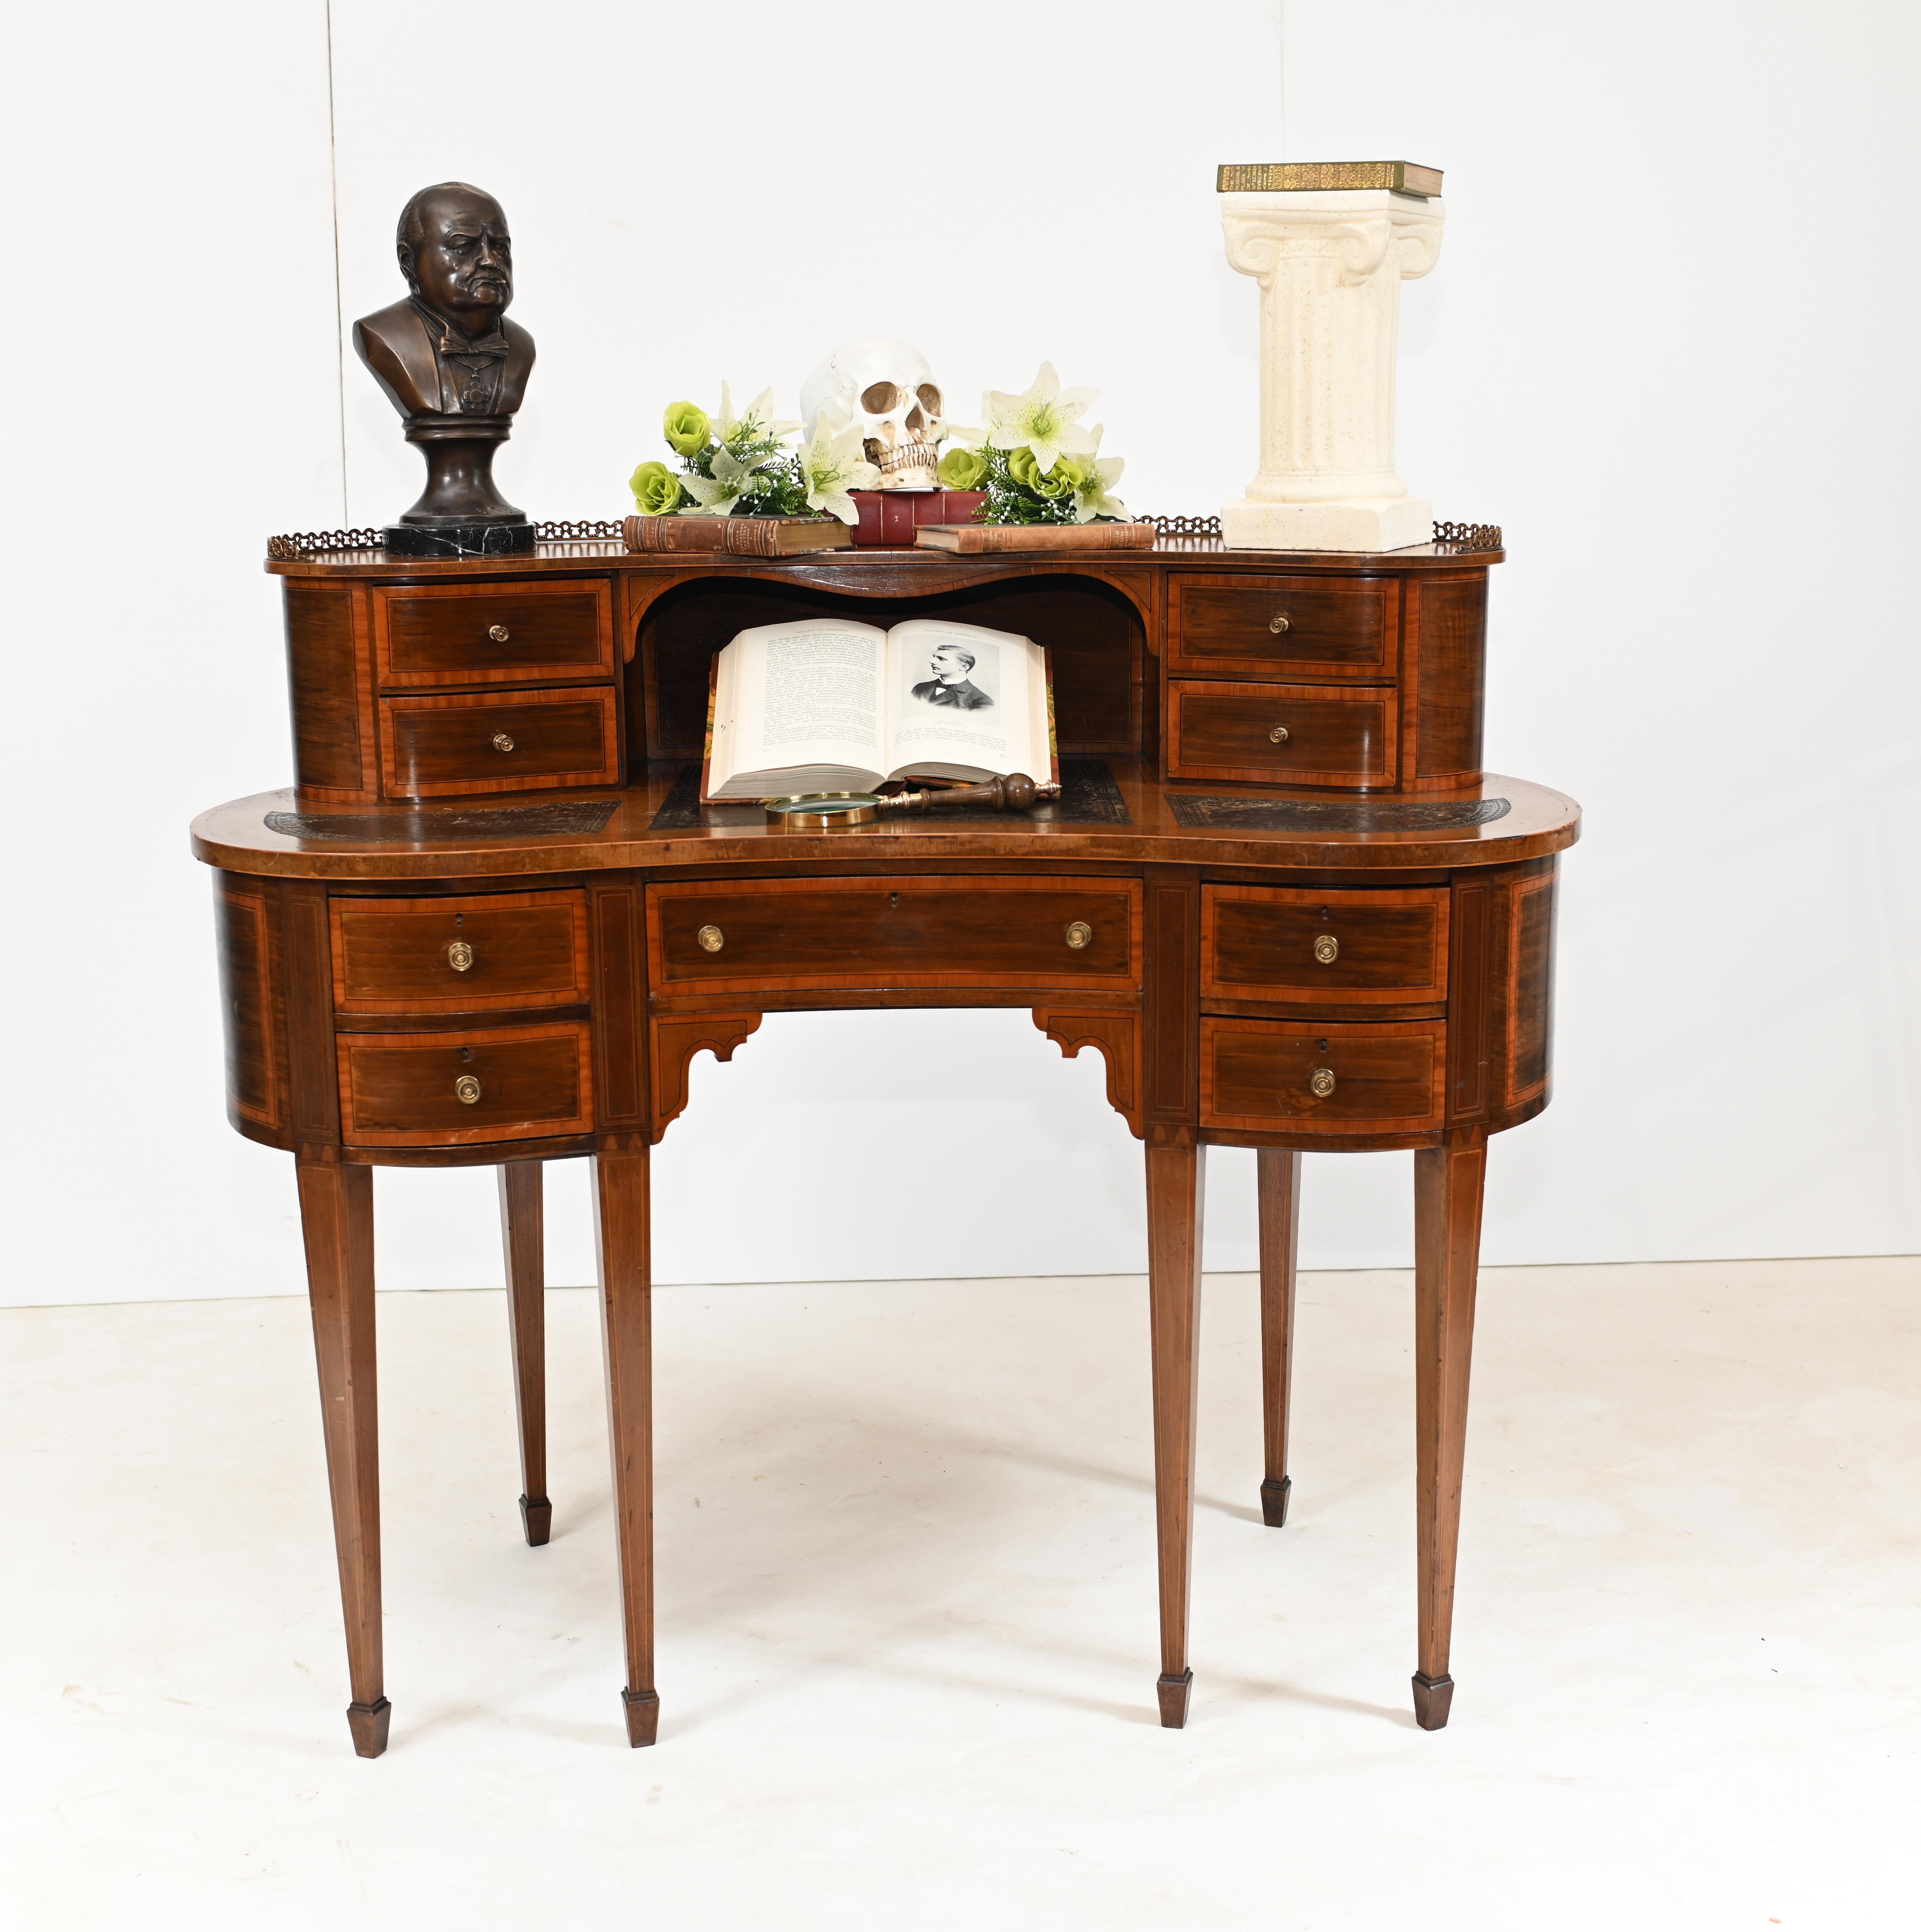 Classic kidney bean desk in mahogany with Satinwood banding
This piece of furniture is period Edwardian circa 1910
Great interiors piece with classically refined design with fluted legs
Offered in great shape ready for home use right away
We